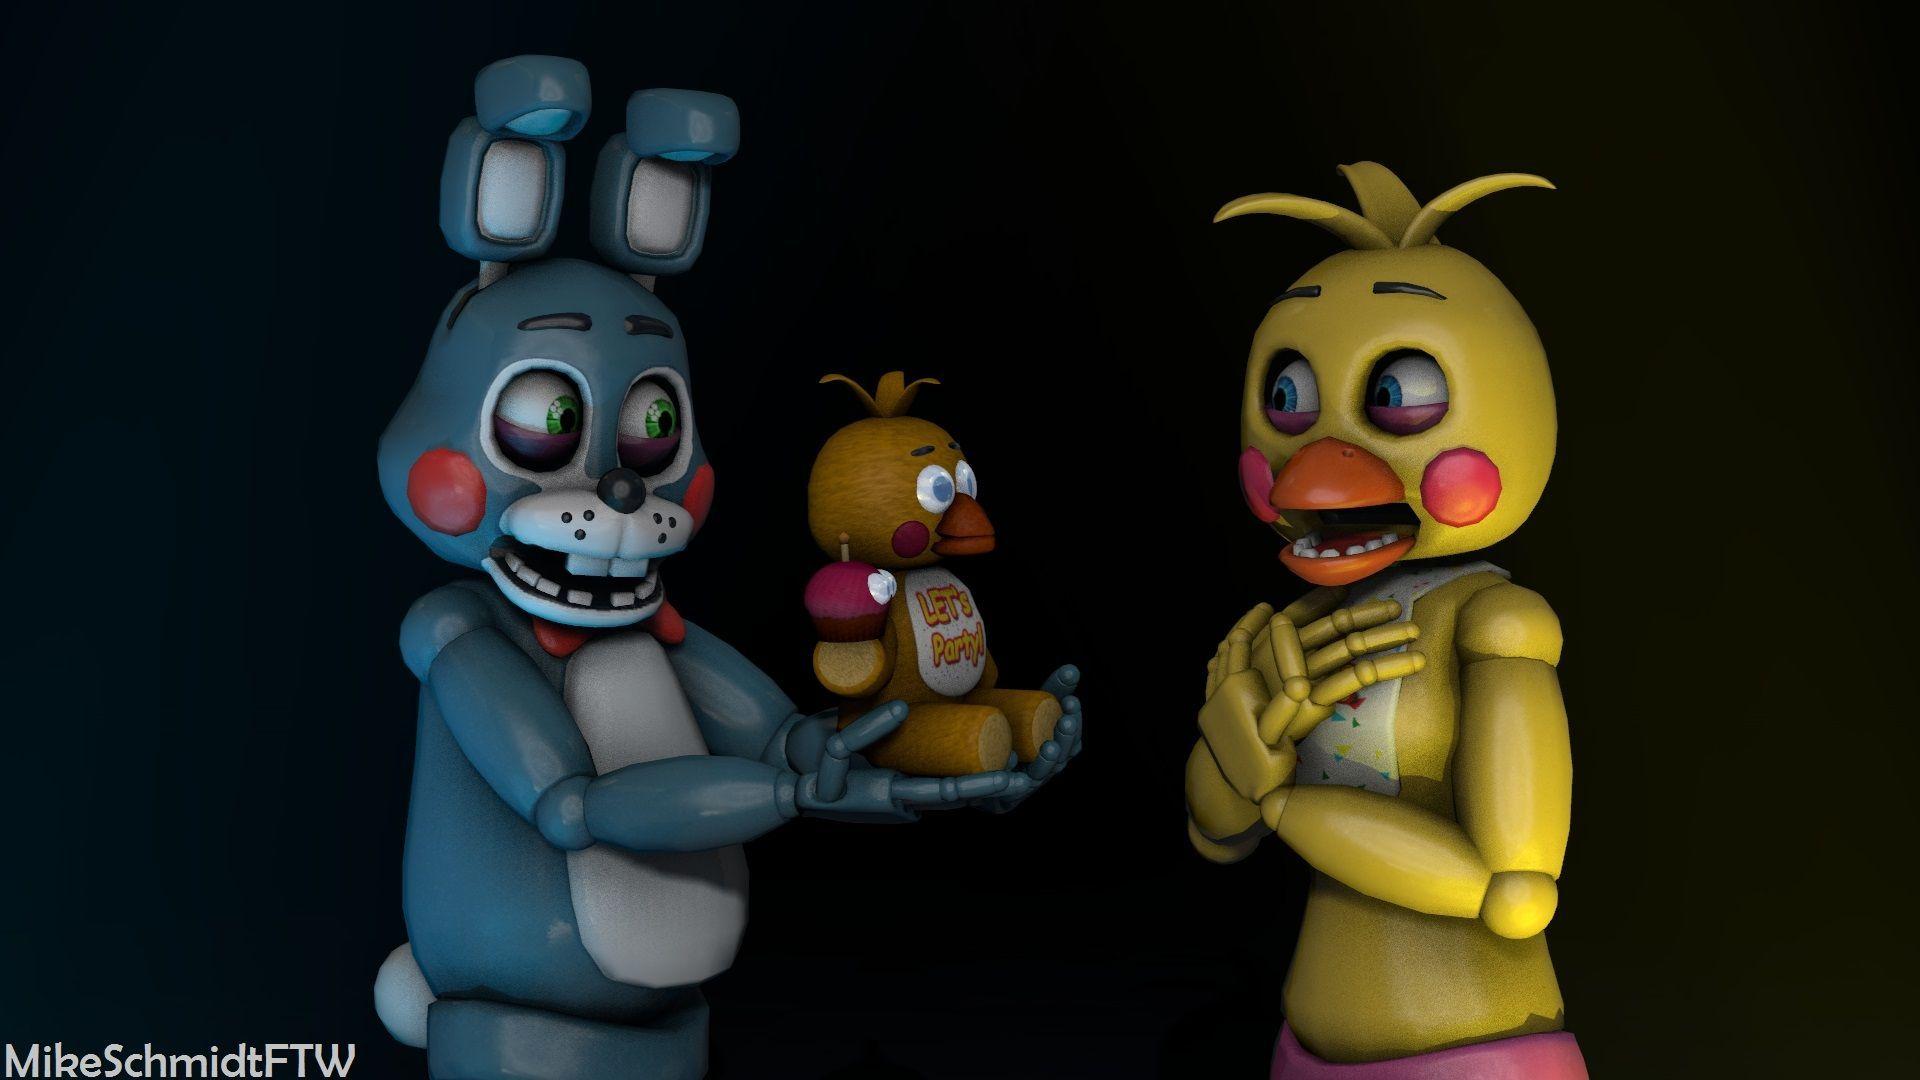 Toy Bonnie and Toy Chica. toy